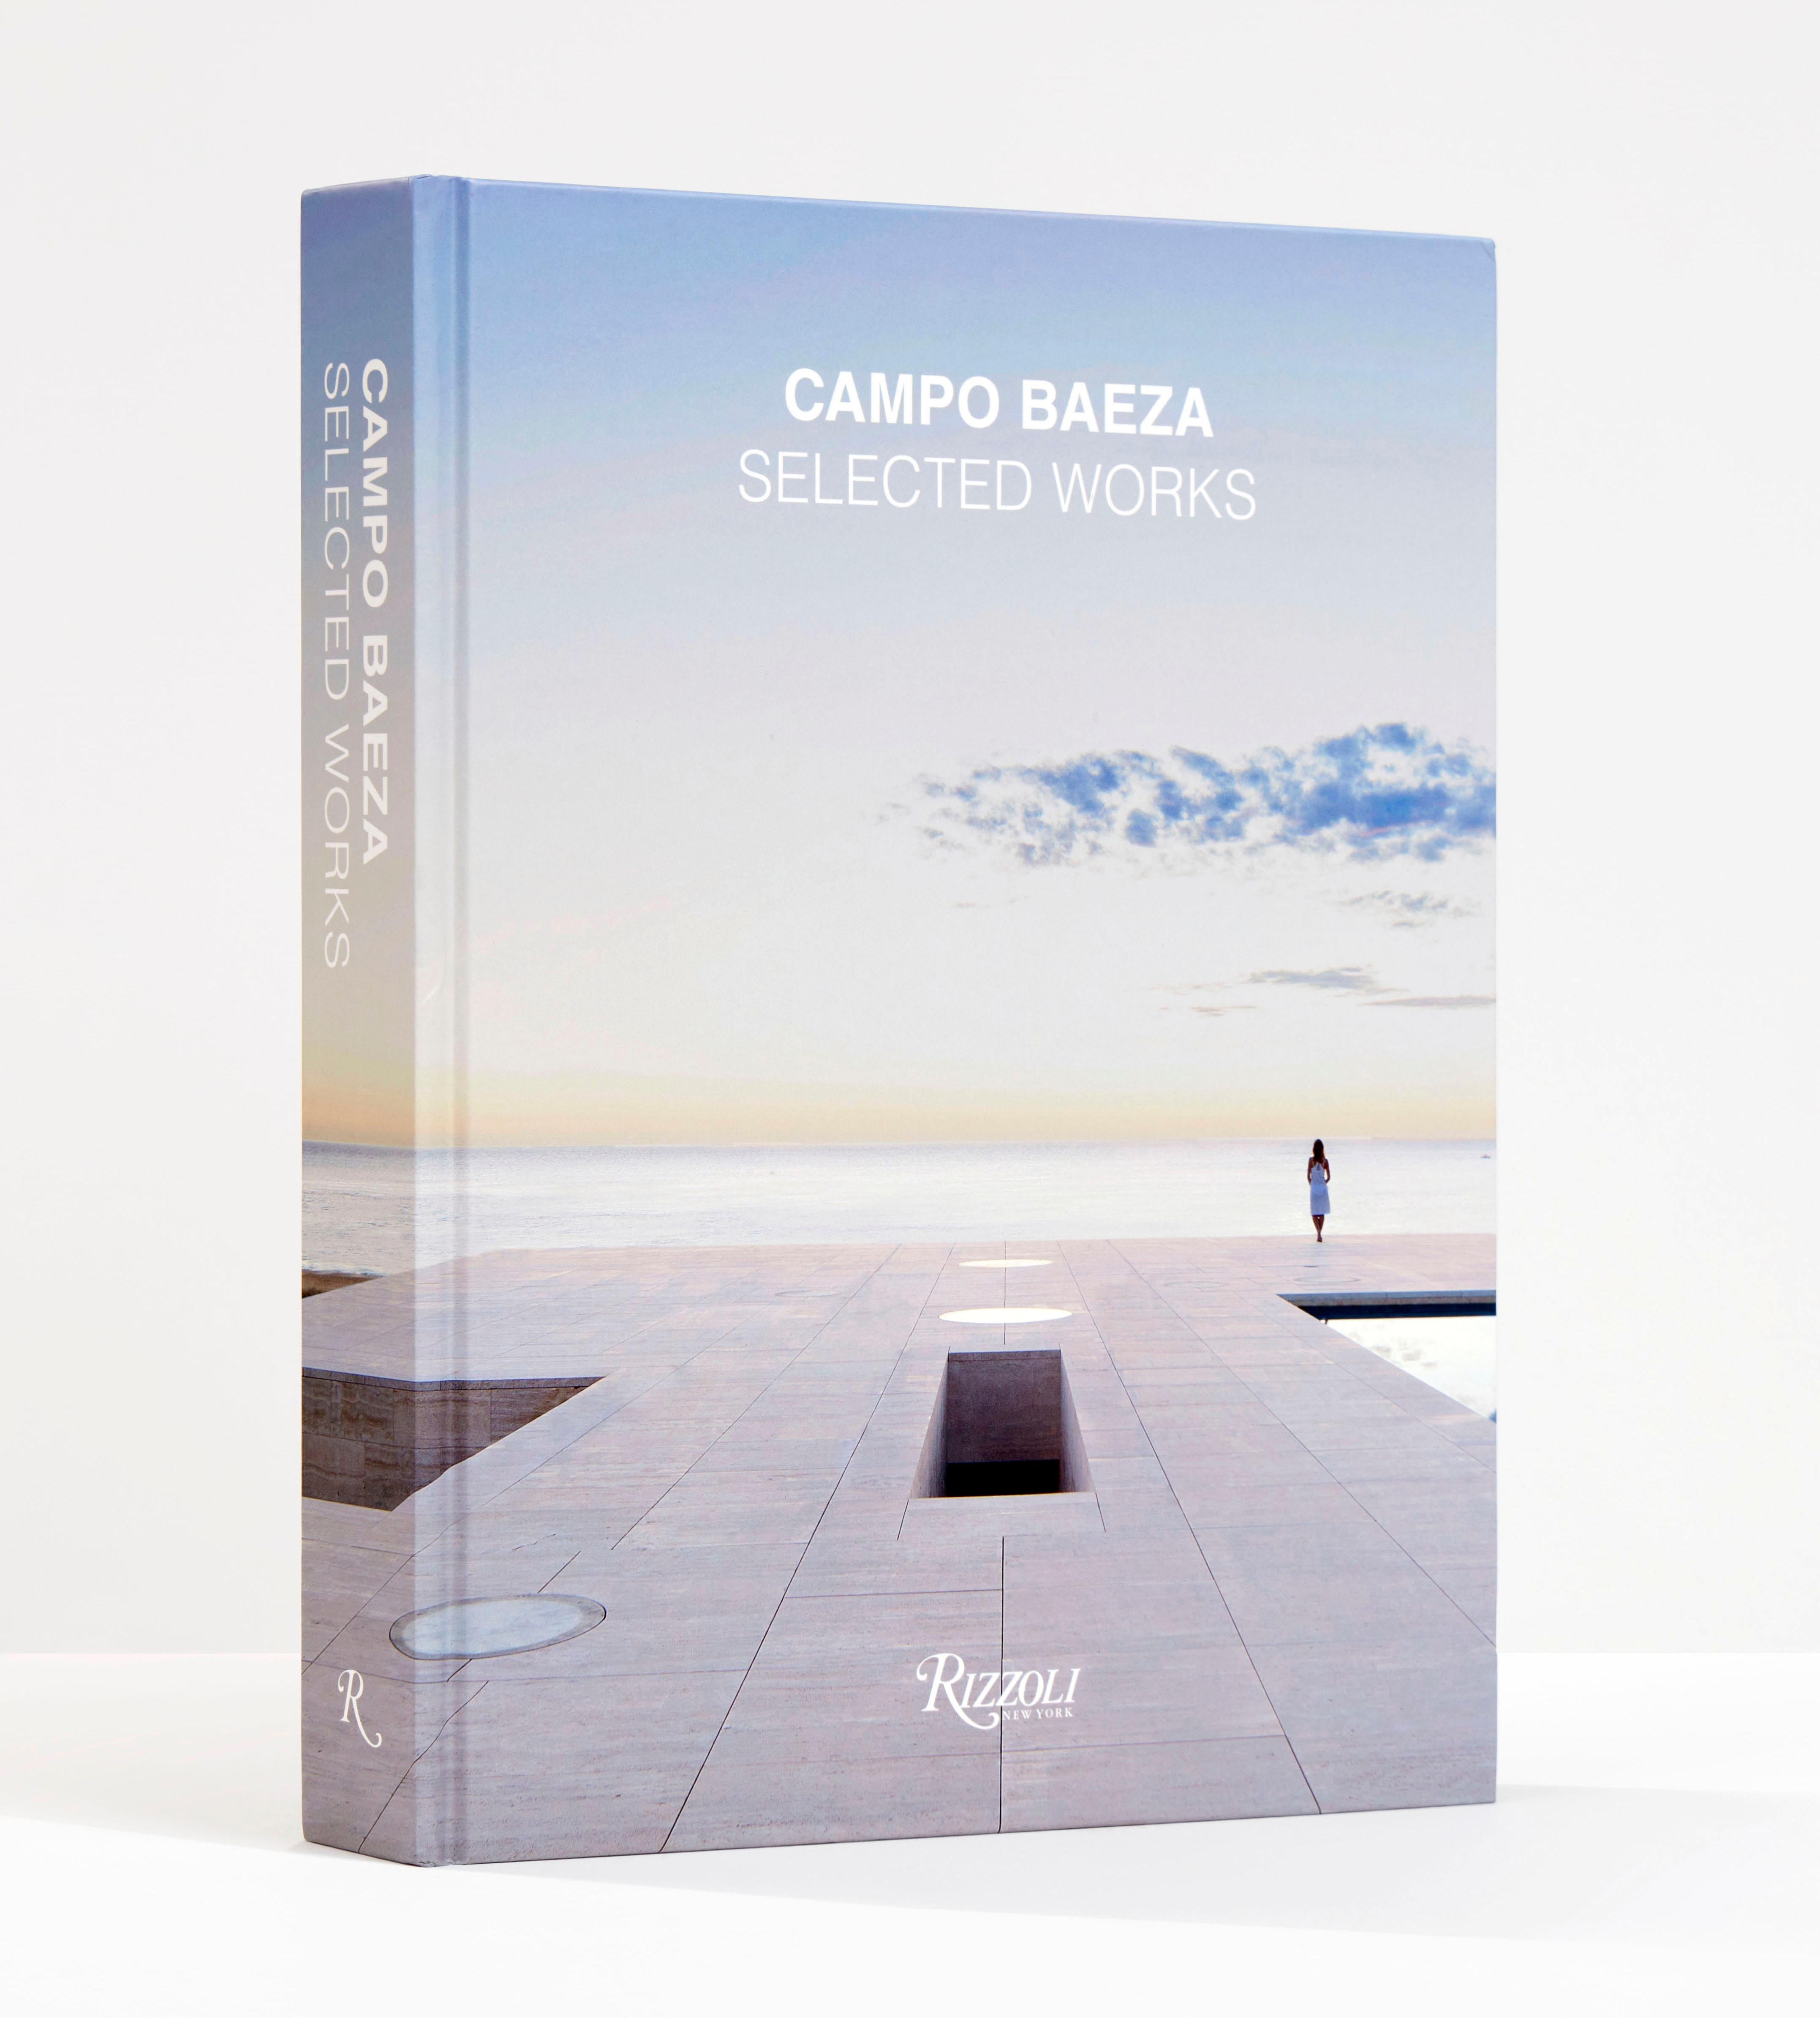 A comprehensive survey of the work of a master of modernist design today.

Alberto Campo Baeza, one of contemporary architecture’s most distinguished voices, is renowned for a body of work that exudes the power of radical simplicity. The